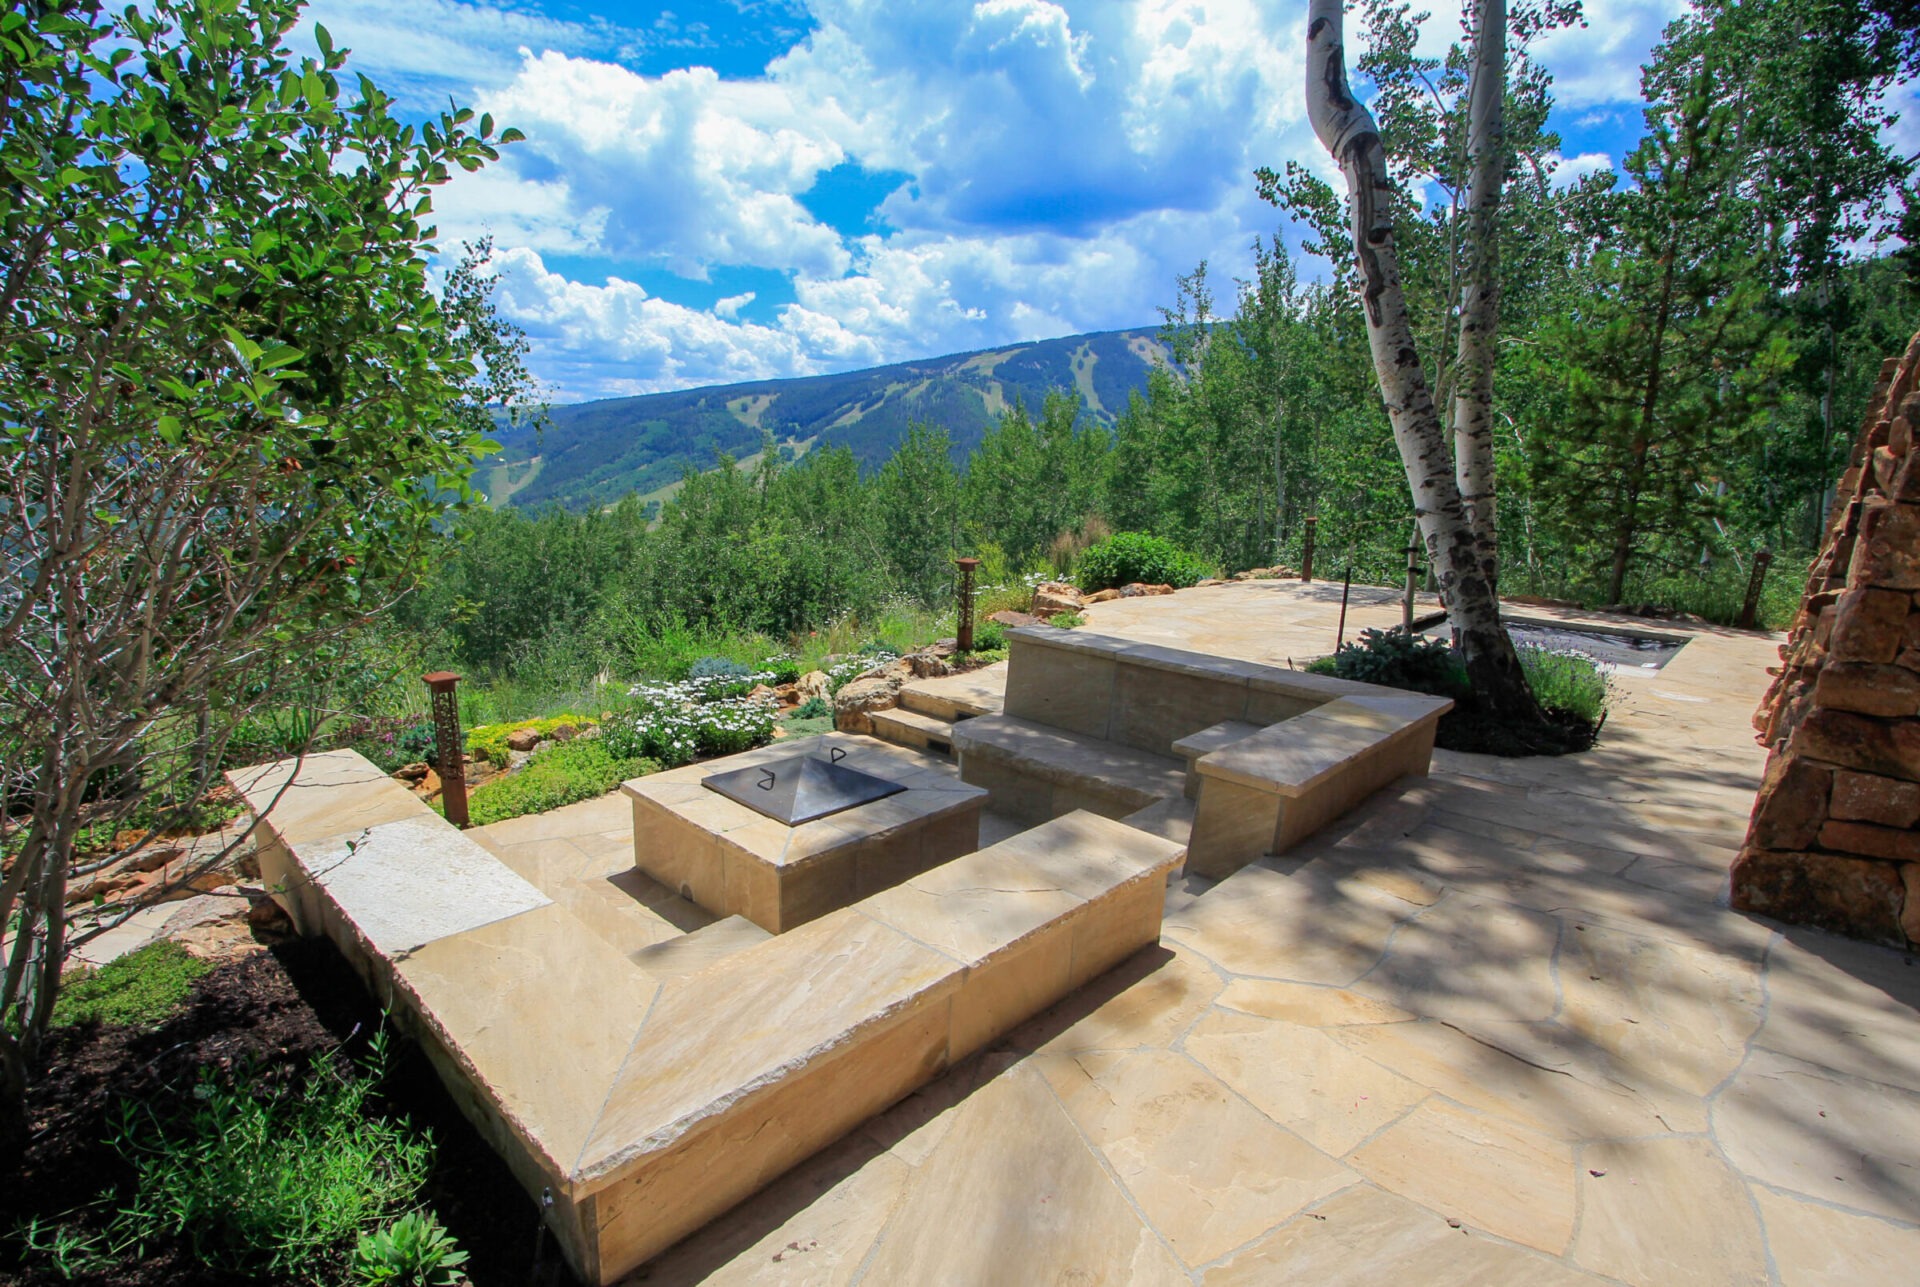 An outdoor stone patio with benches, a fire pit, lush greenery, and mountain views under a blue sky with fluffy clouds.